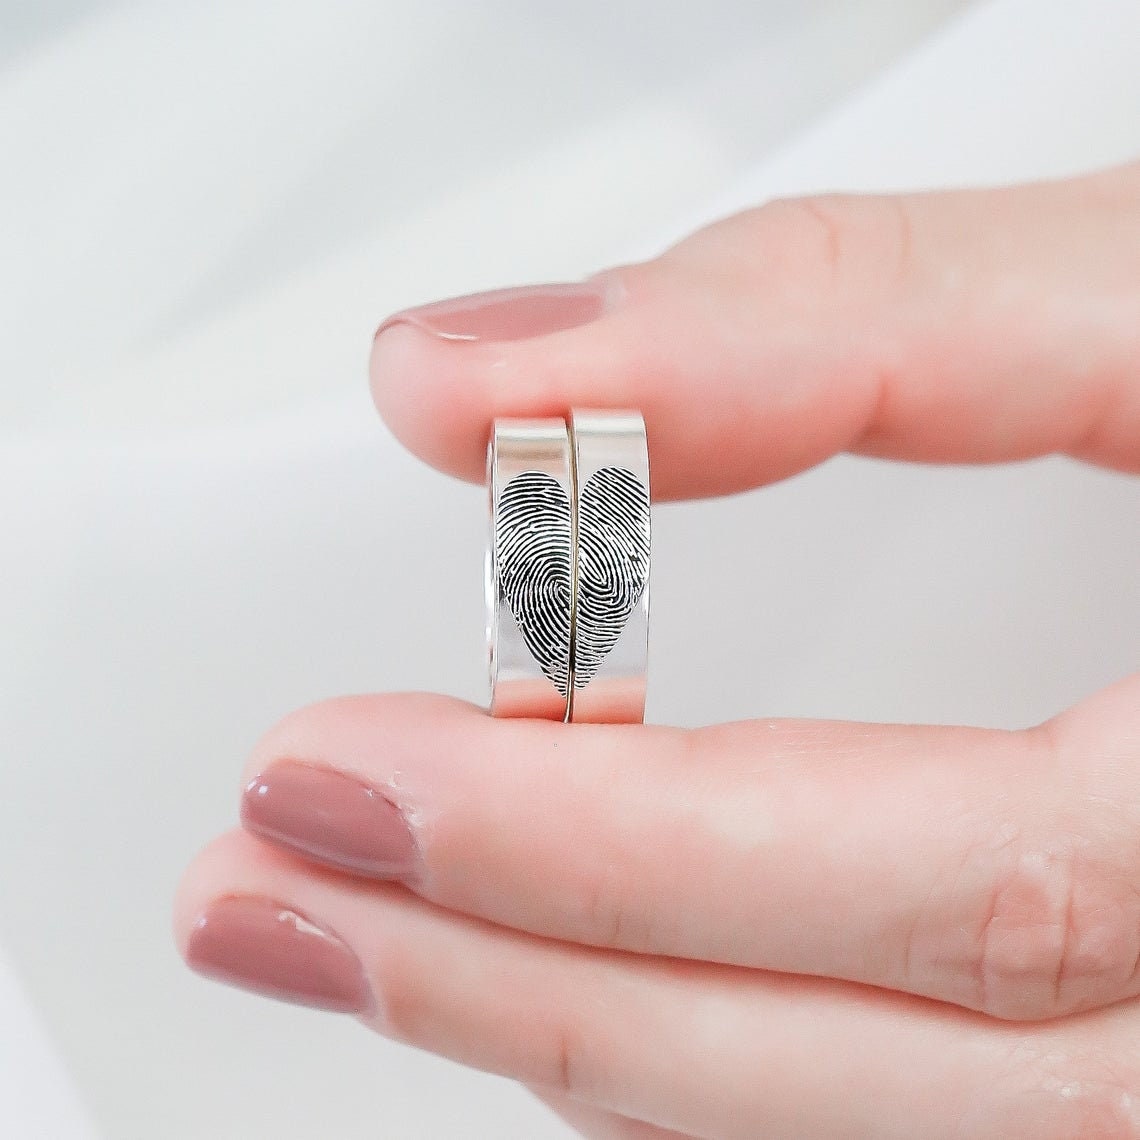 Couples' Fingerprint Rings - 4mm Bands: Personalized Symbols of Love